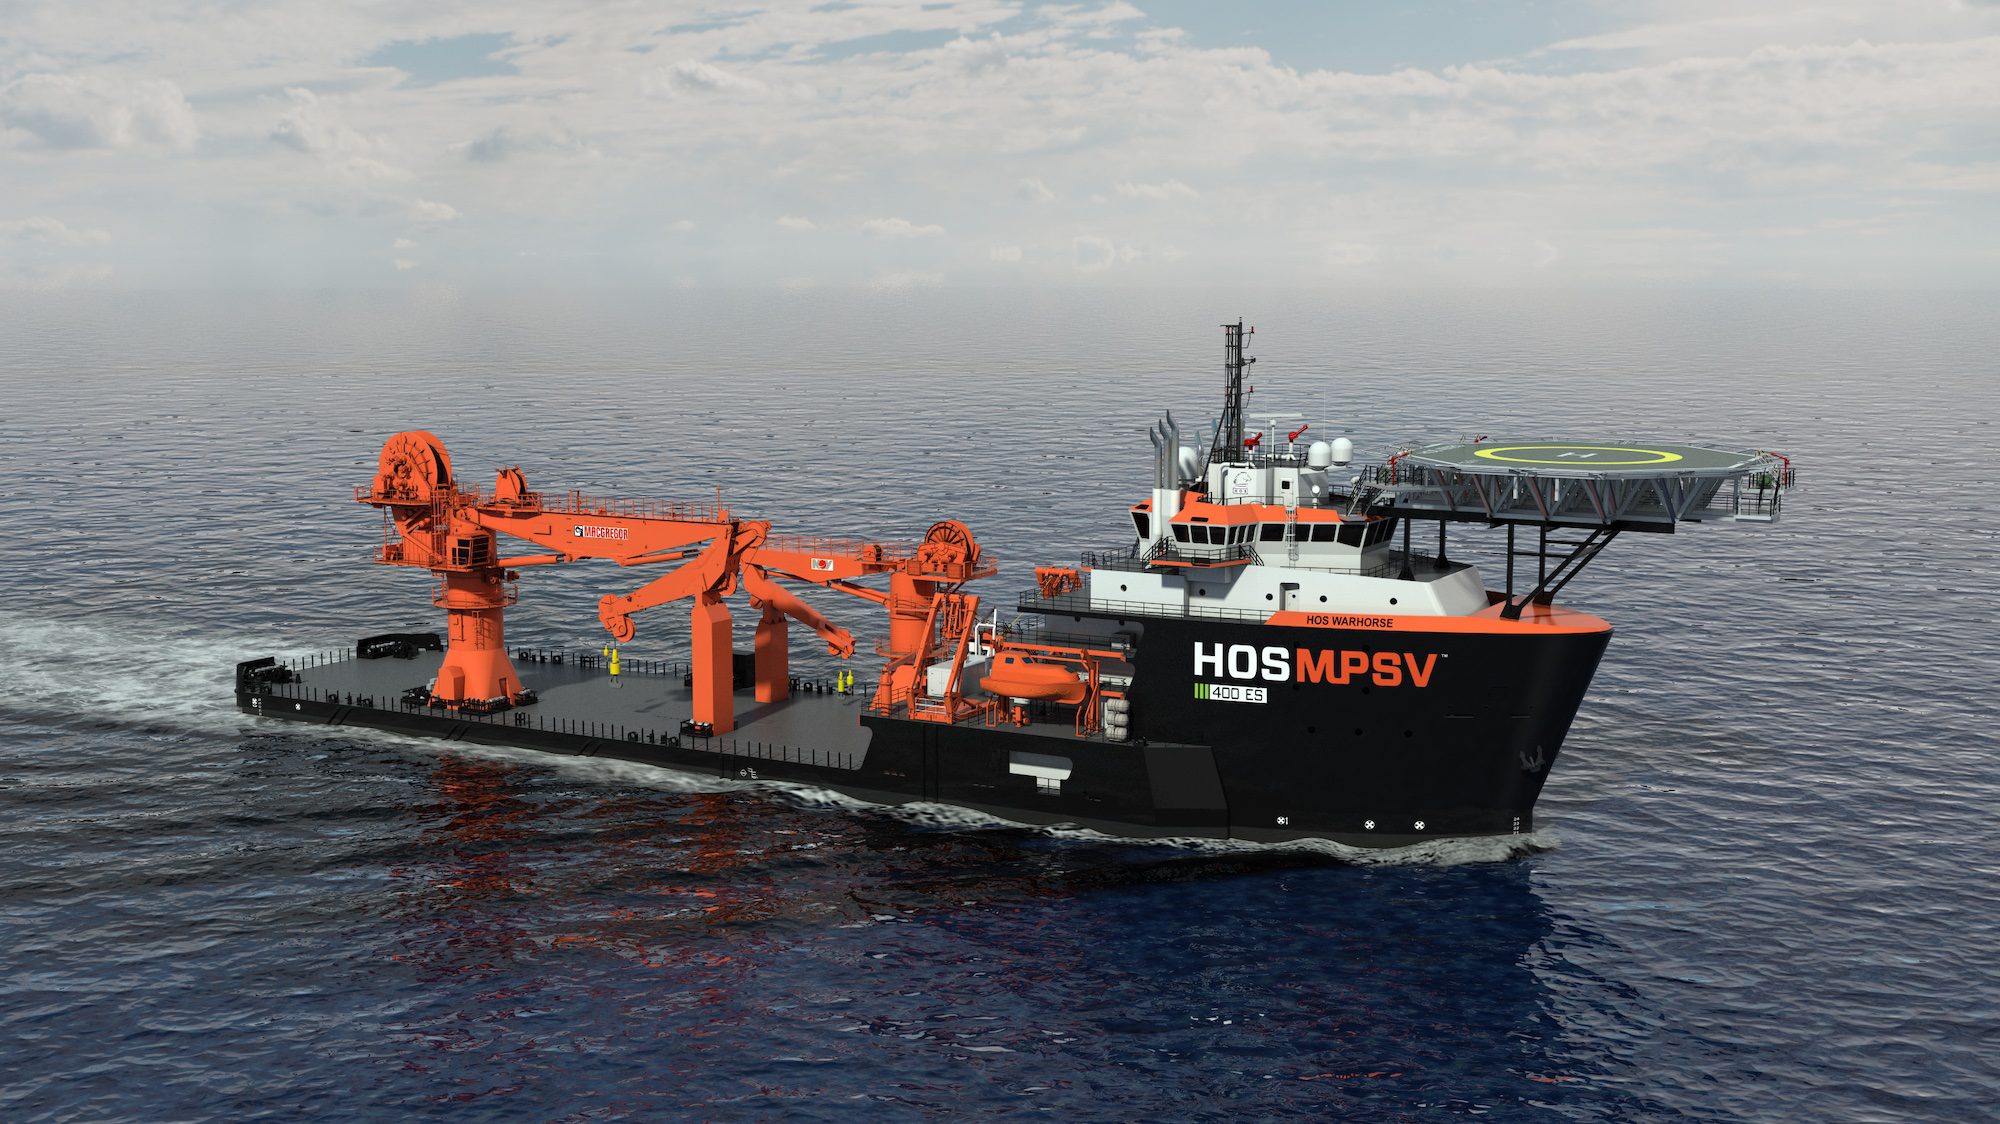 An illustration of the 400 class Multi-Purpose Support Vessels (MPSVs). Image courtesy Hornbeck Offshore via Eastern Shipbuilding